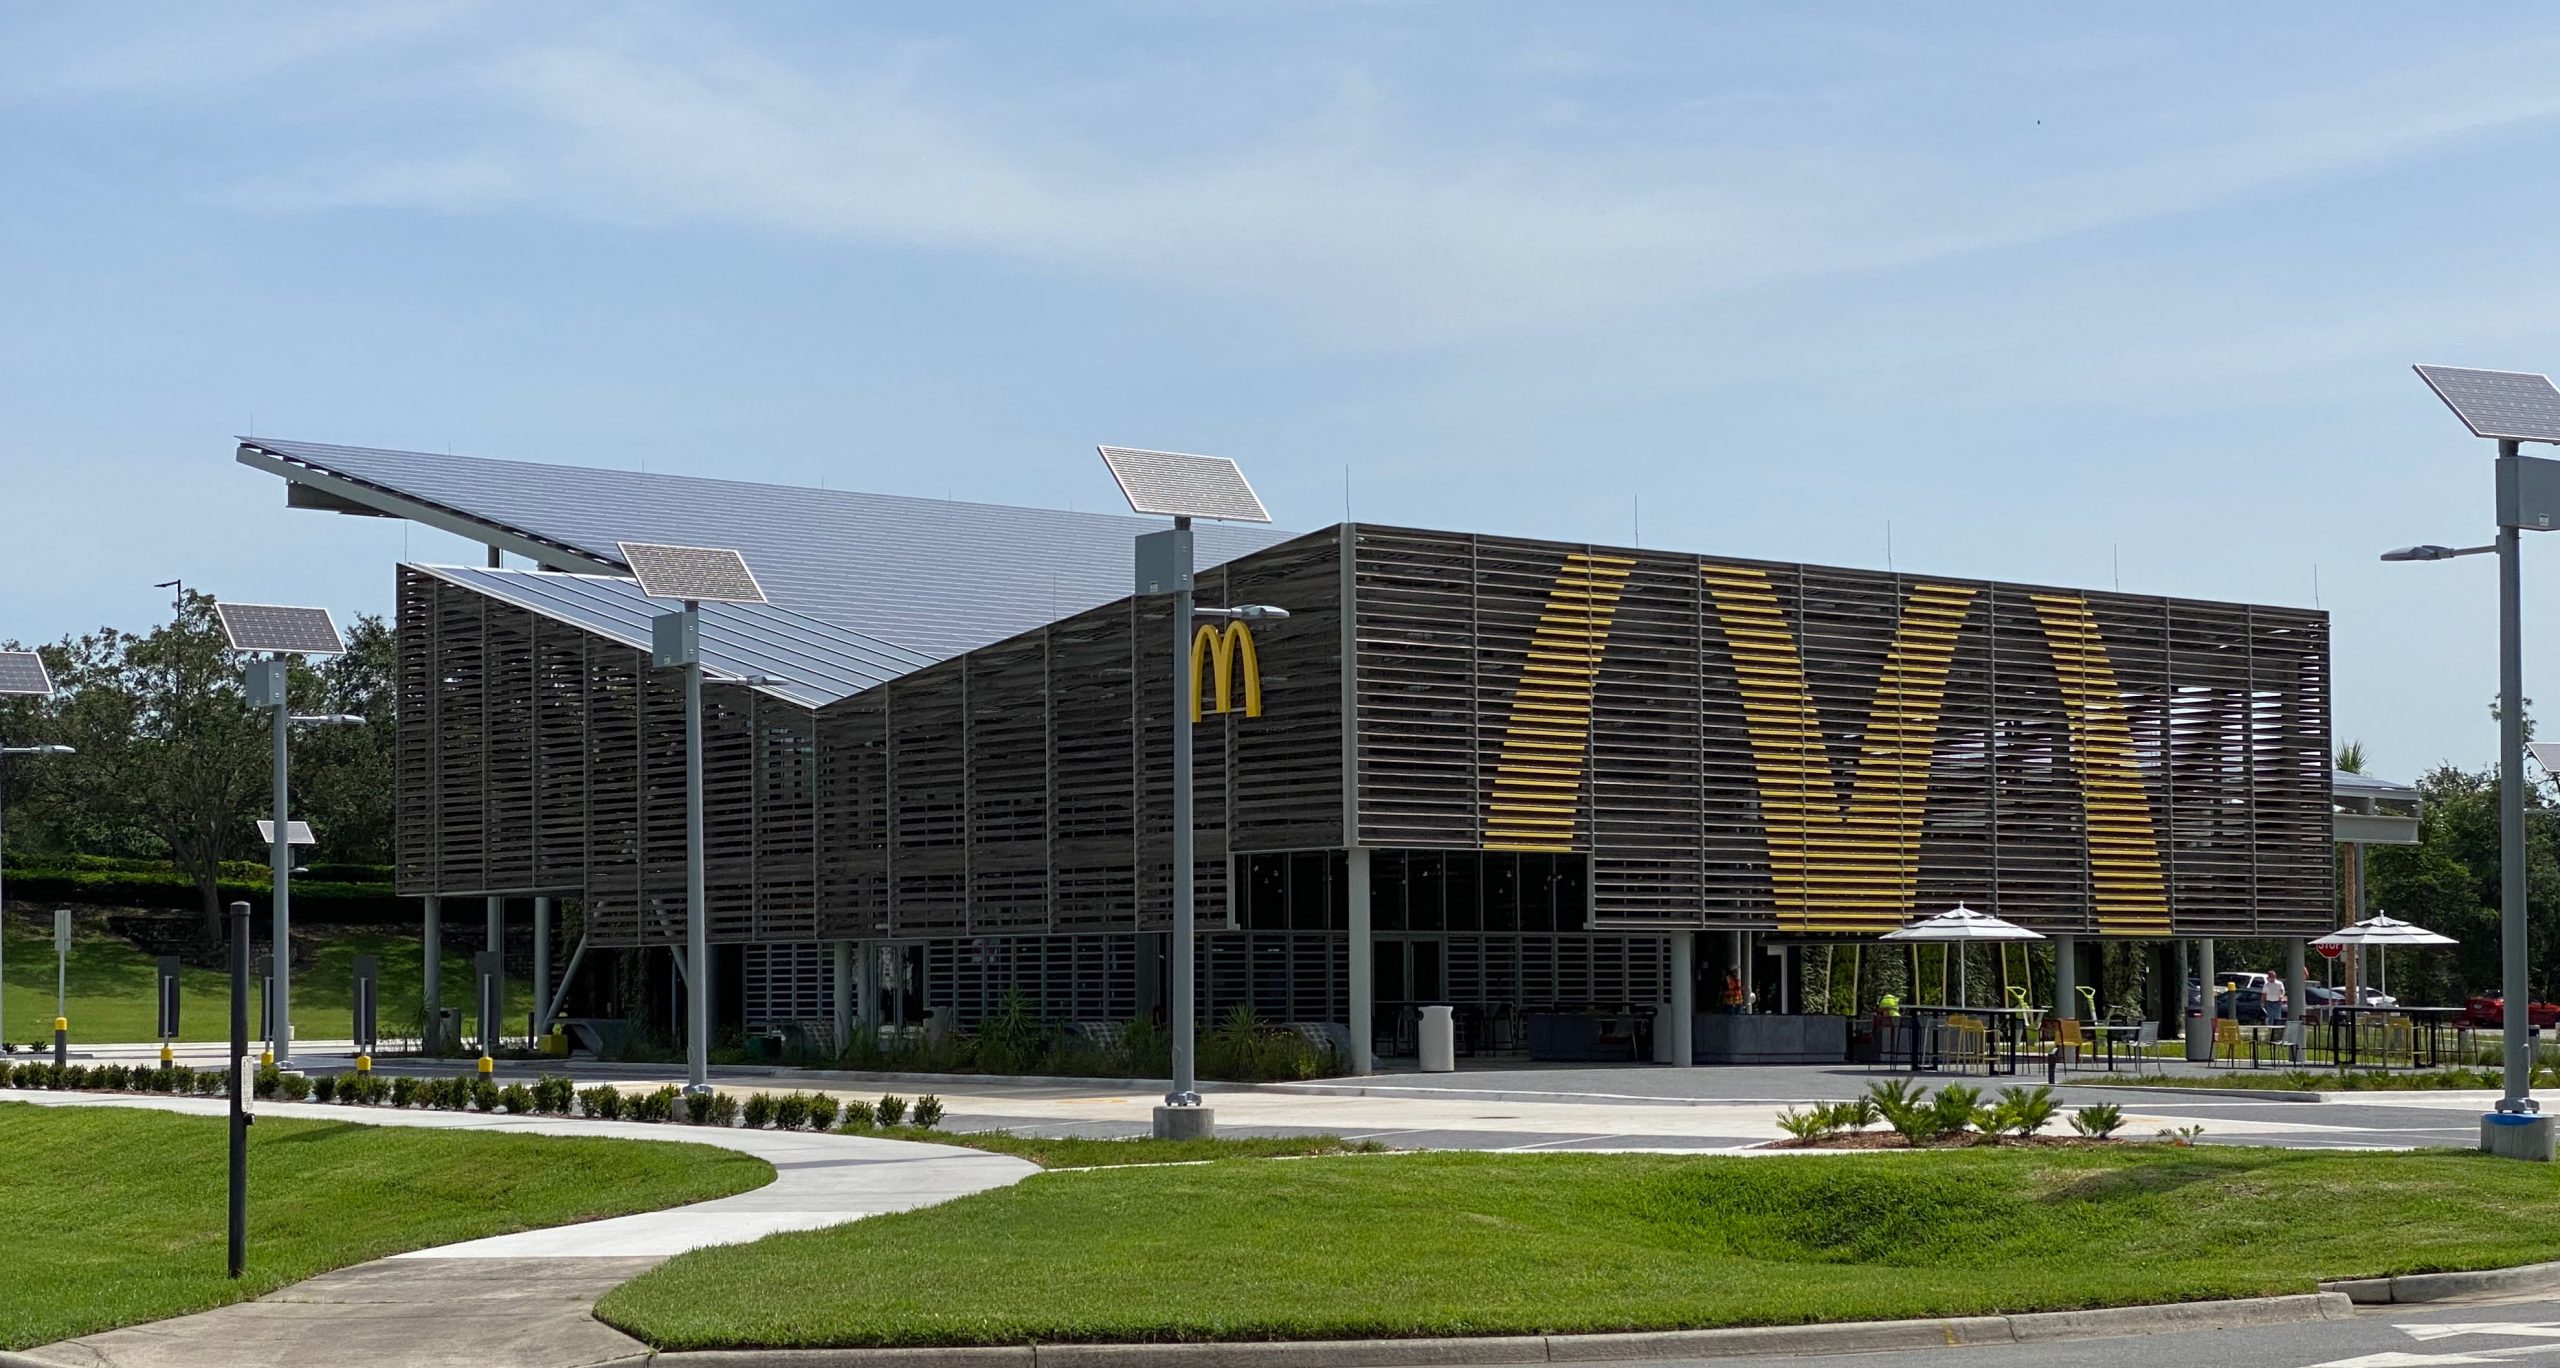 The McDonald's at the Walt Disney World resort in Bay Lake Florida during the day featuring kebony modified wood siding showcasing the McDonald's golden arch logo painted on the side of the building